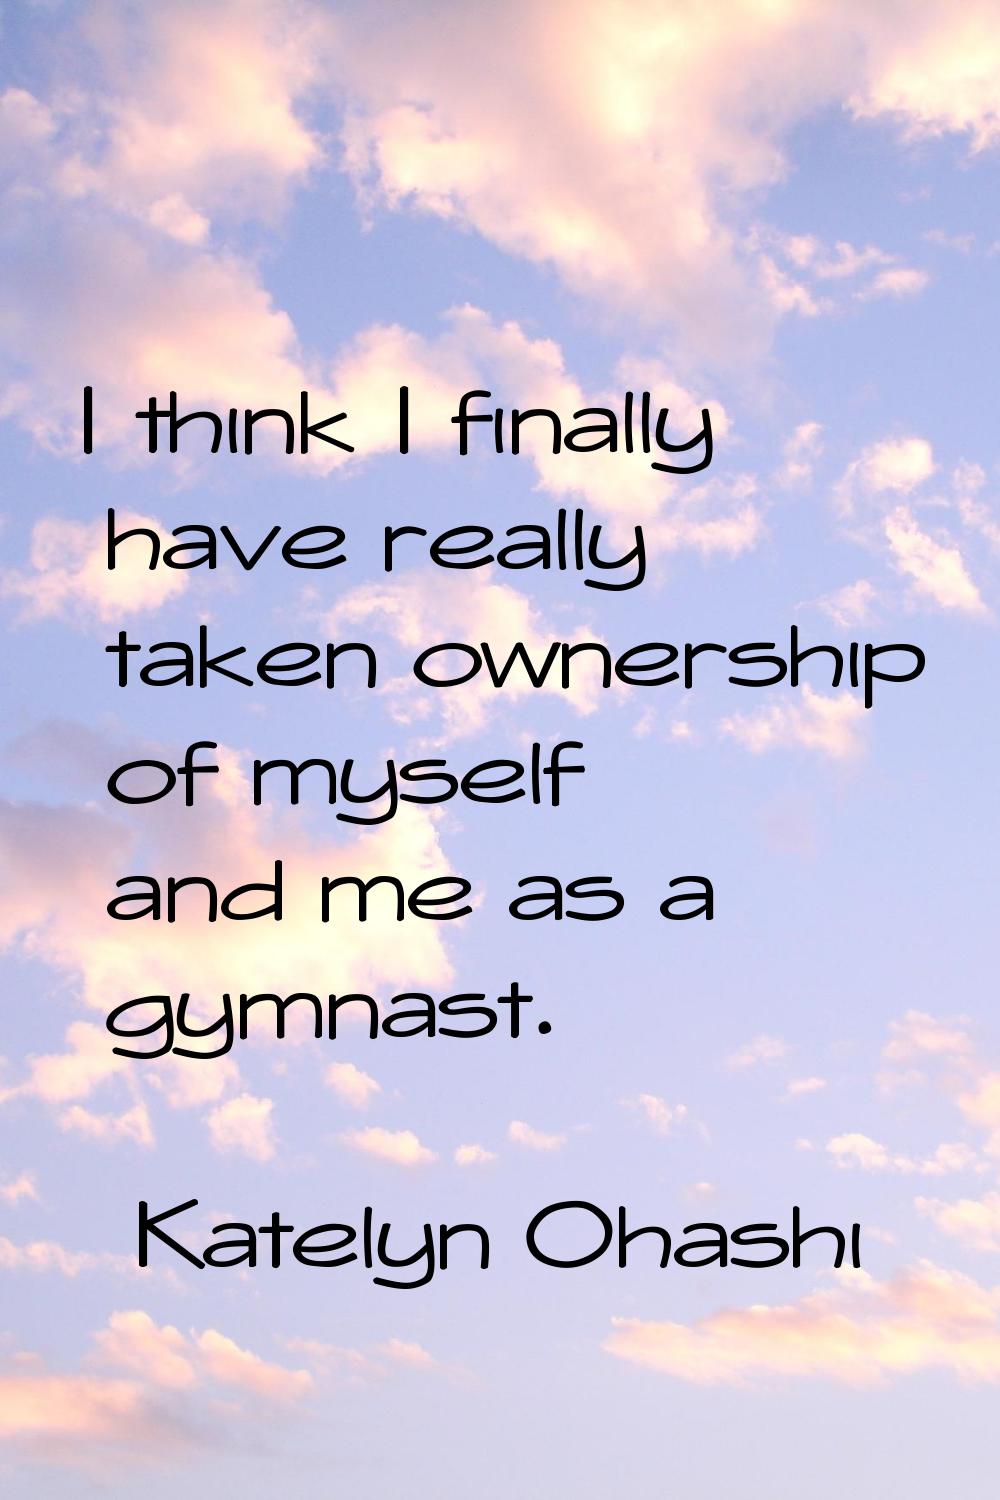 I think I finally have really taken ownership of myself and me as a gymnast.